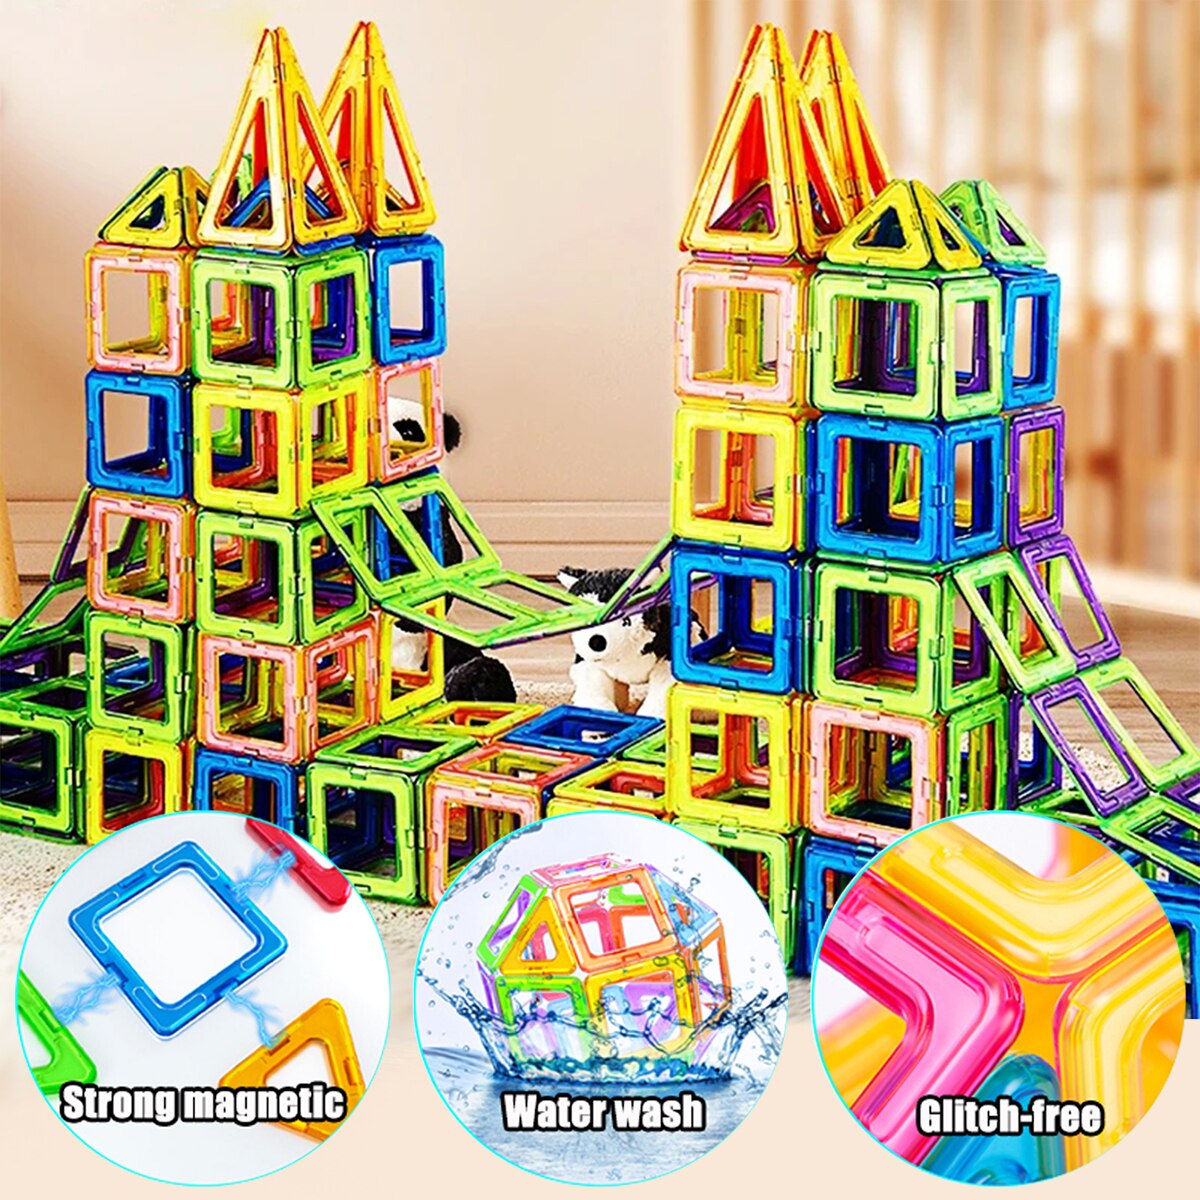 Magnetic DIY Magnet Toys for Creative Building Play